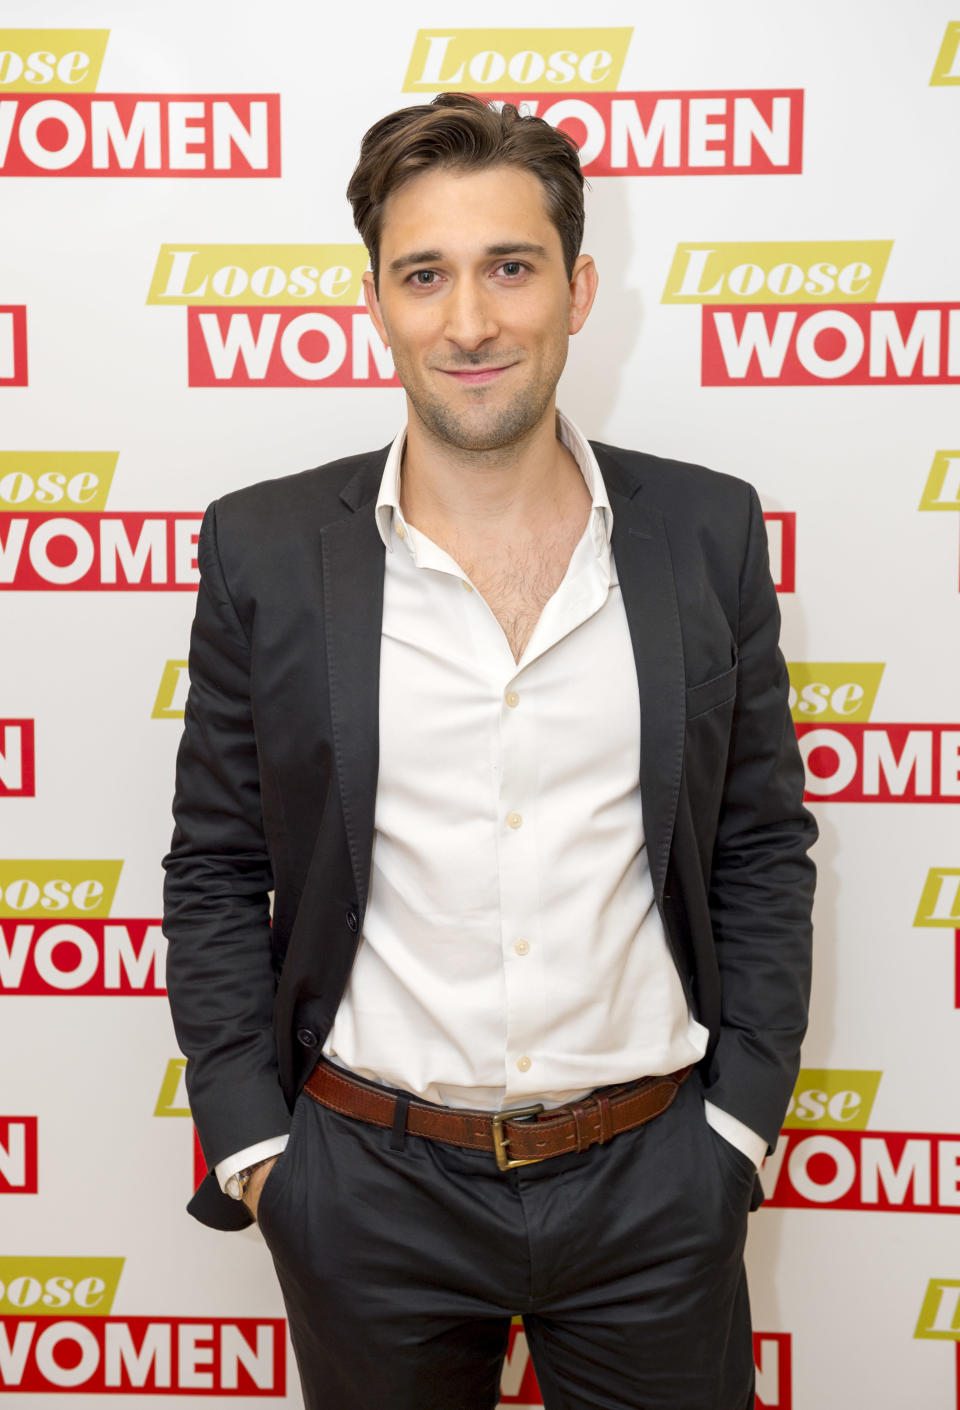 The late Lynda Bellingham’s son, Michael Peluso, has publicly laid into stepfather Michael Pattemore once again, amid their ongoing battle over the former ‘Loose Women’ panellist’s will.